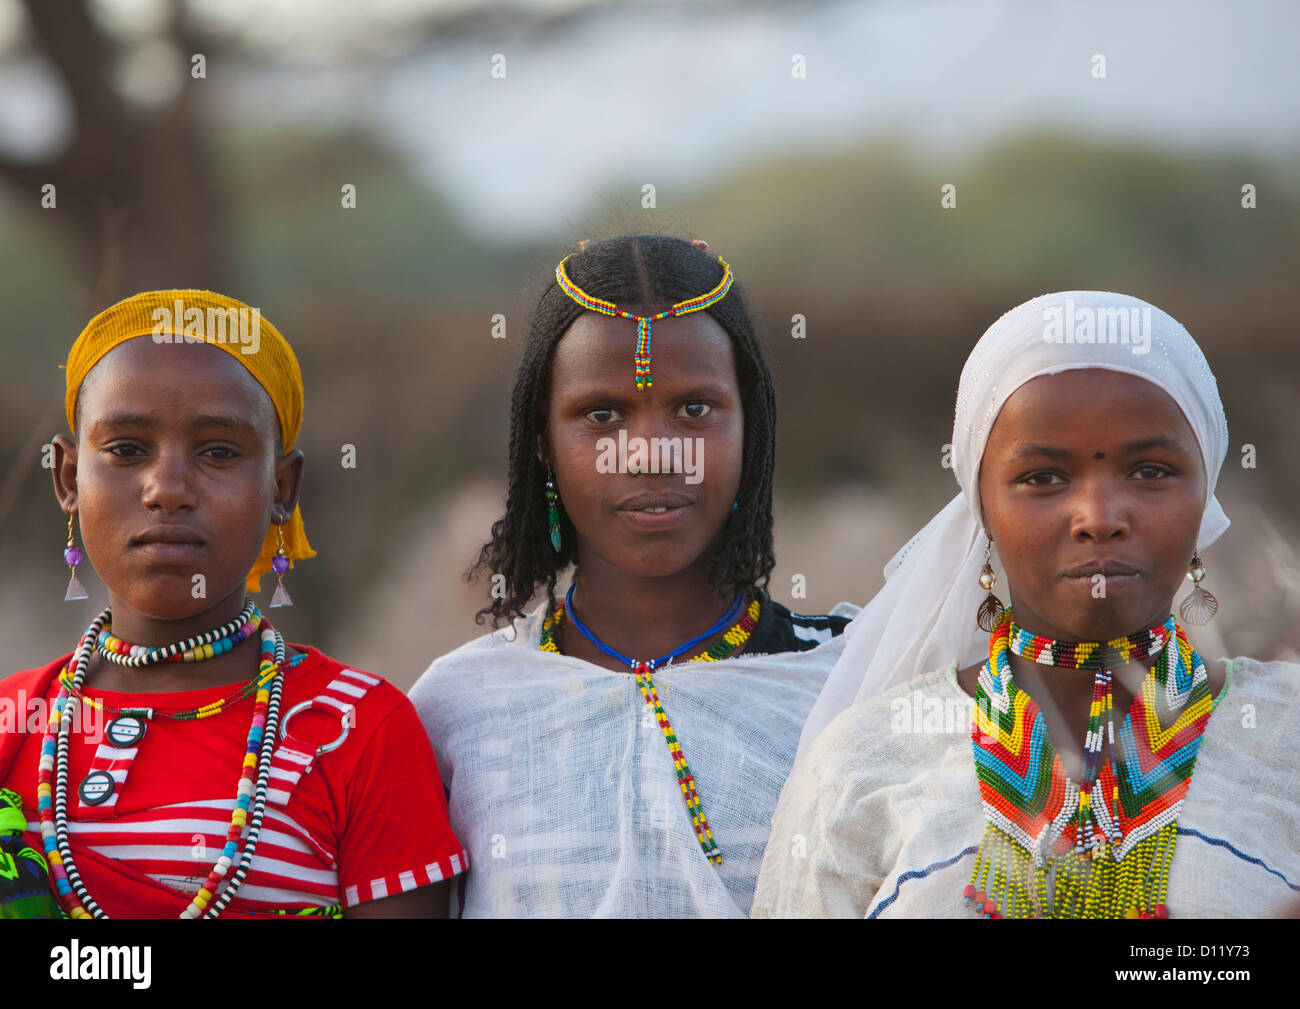 Three Smiling Karrayyu Tribe Girls With Stranded Hair, Colourful Jewels And Headscarfs At Gadaaa Ceremony, Metehara, Ethiopia Stock Photo